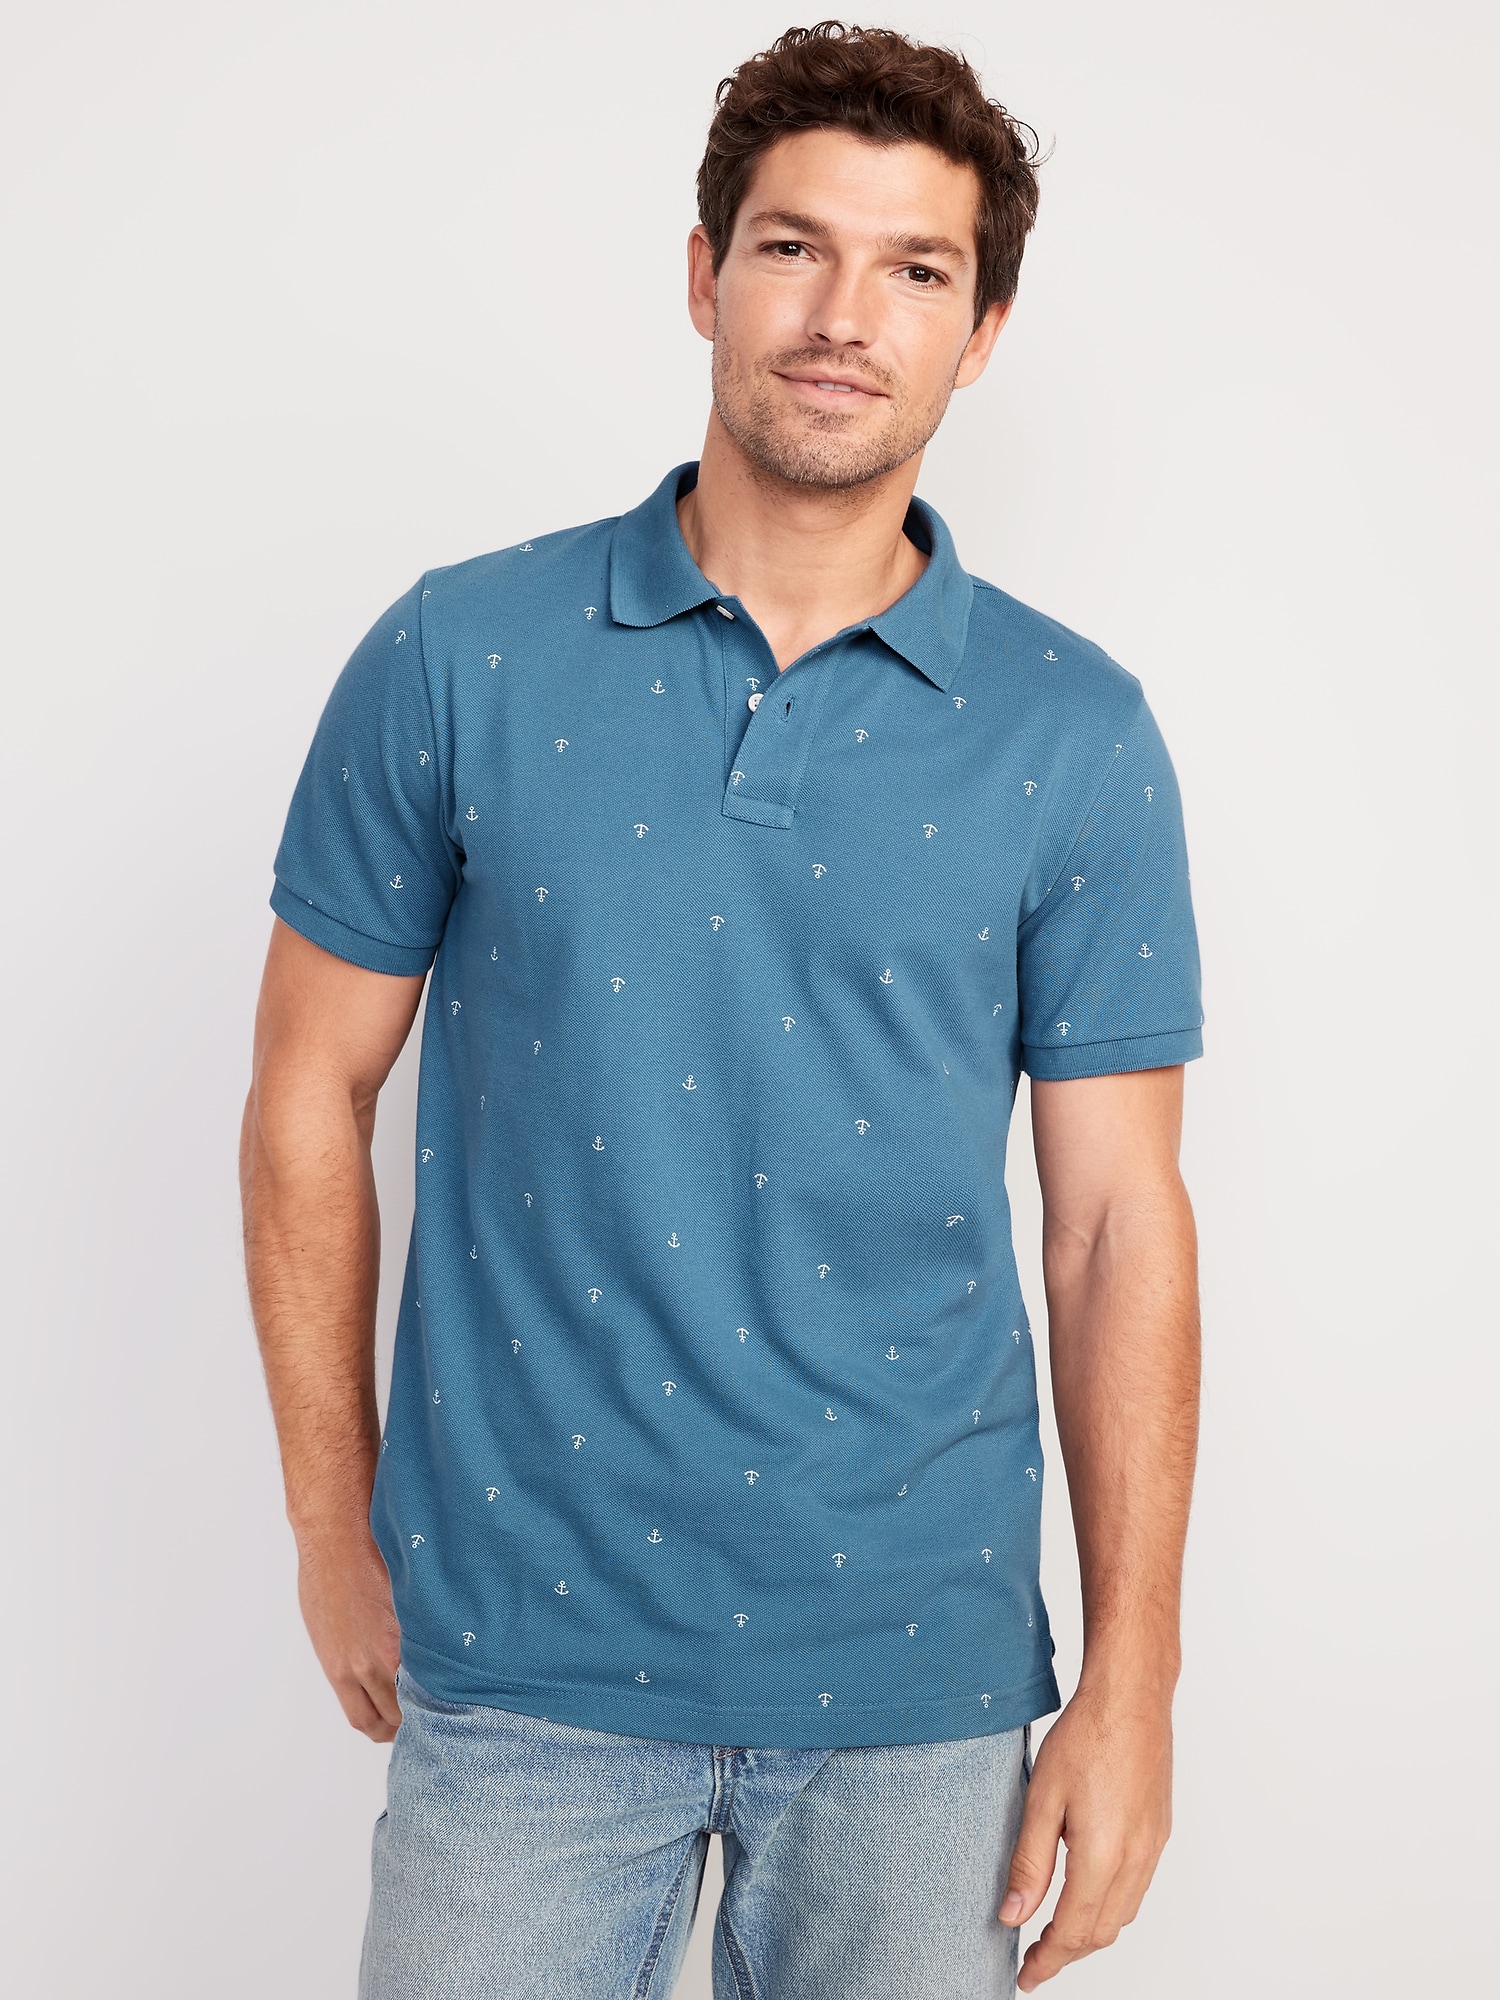 Old Navy Printed Classic Fit Pique Polo for Men blue. 1